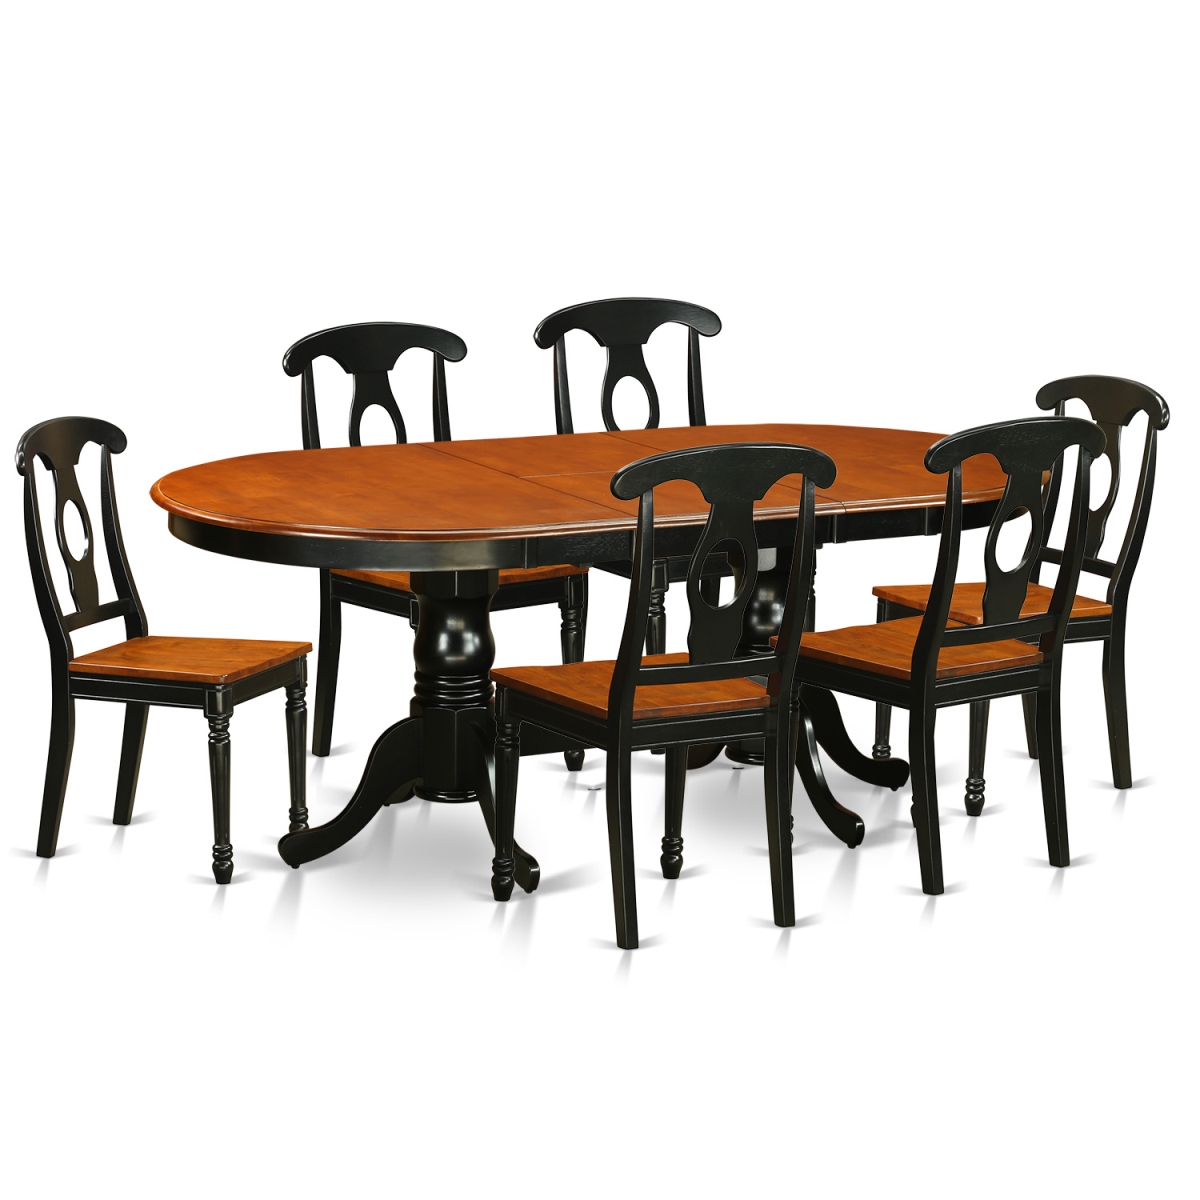 PLKE7-BCH-W Dining Room Set - Table with Six Solid Chairs, Black & Cherry - 7 Piece -  East West Furniture